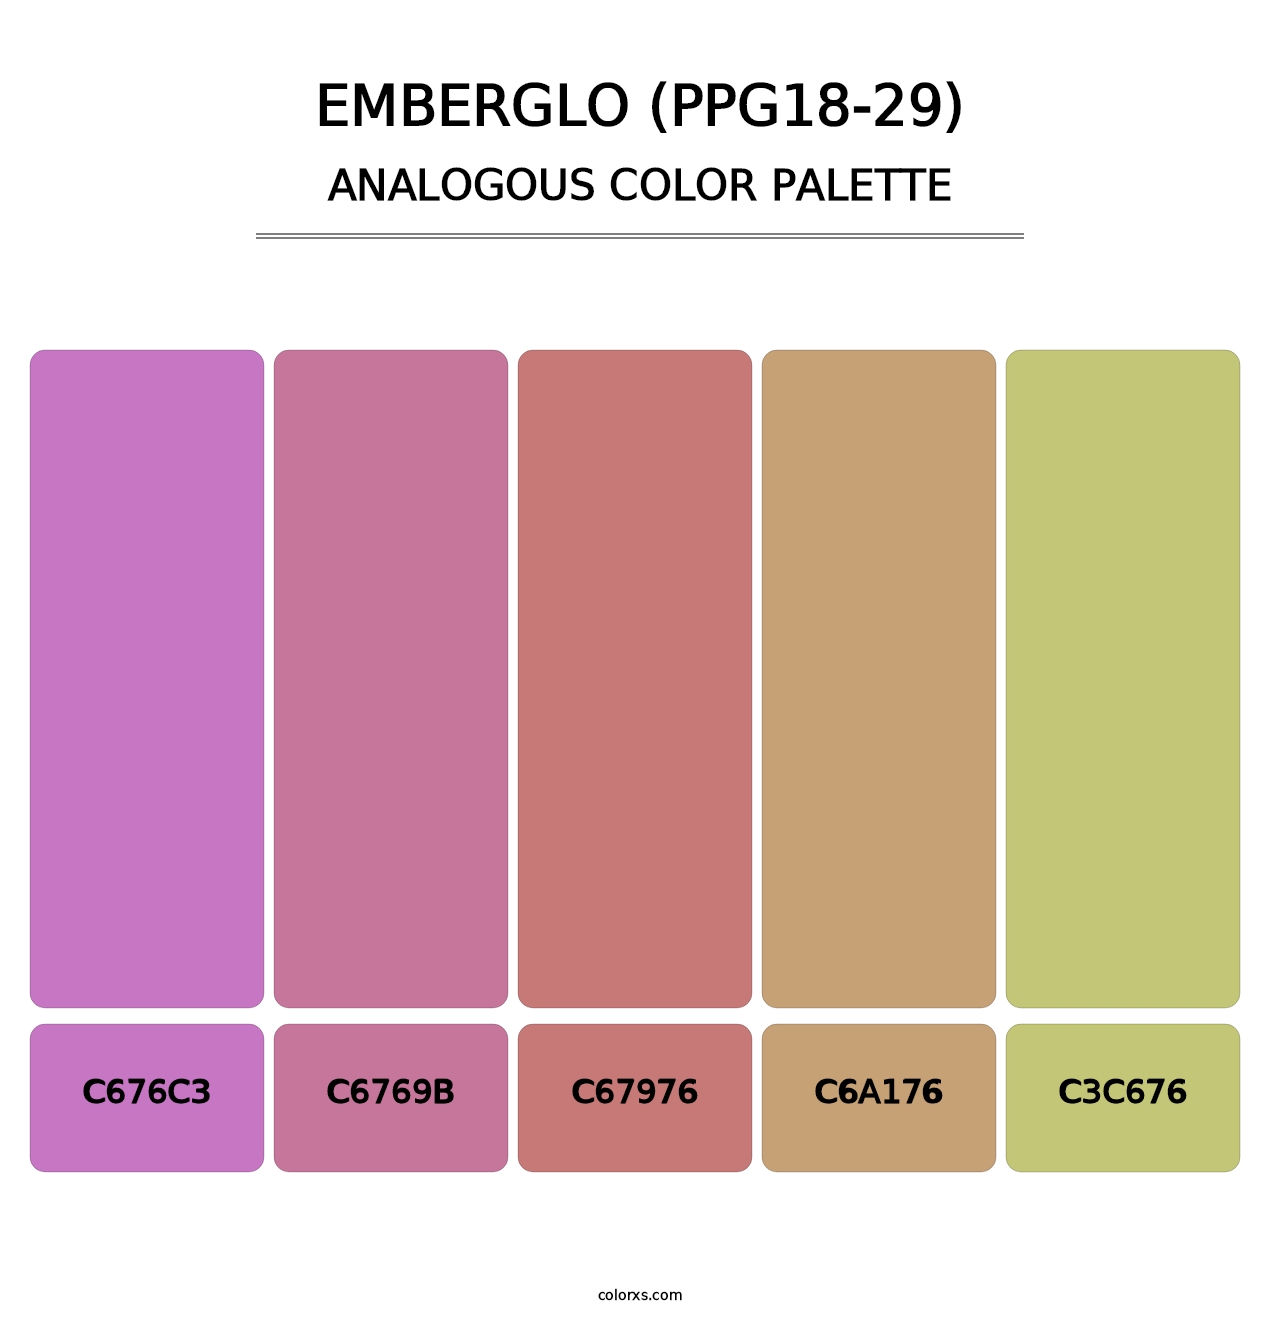 Emberglo (PPG18-29) - Analogous Color Palette